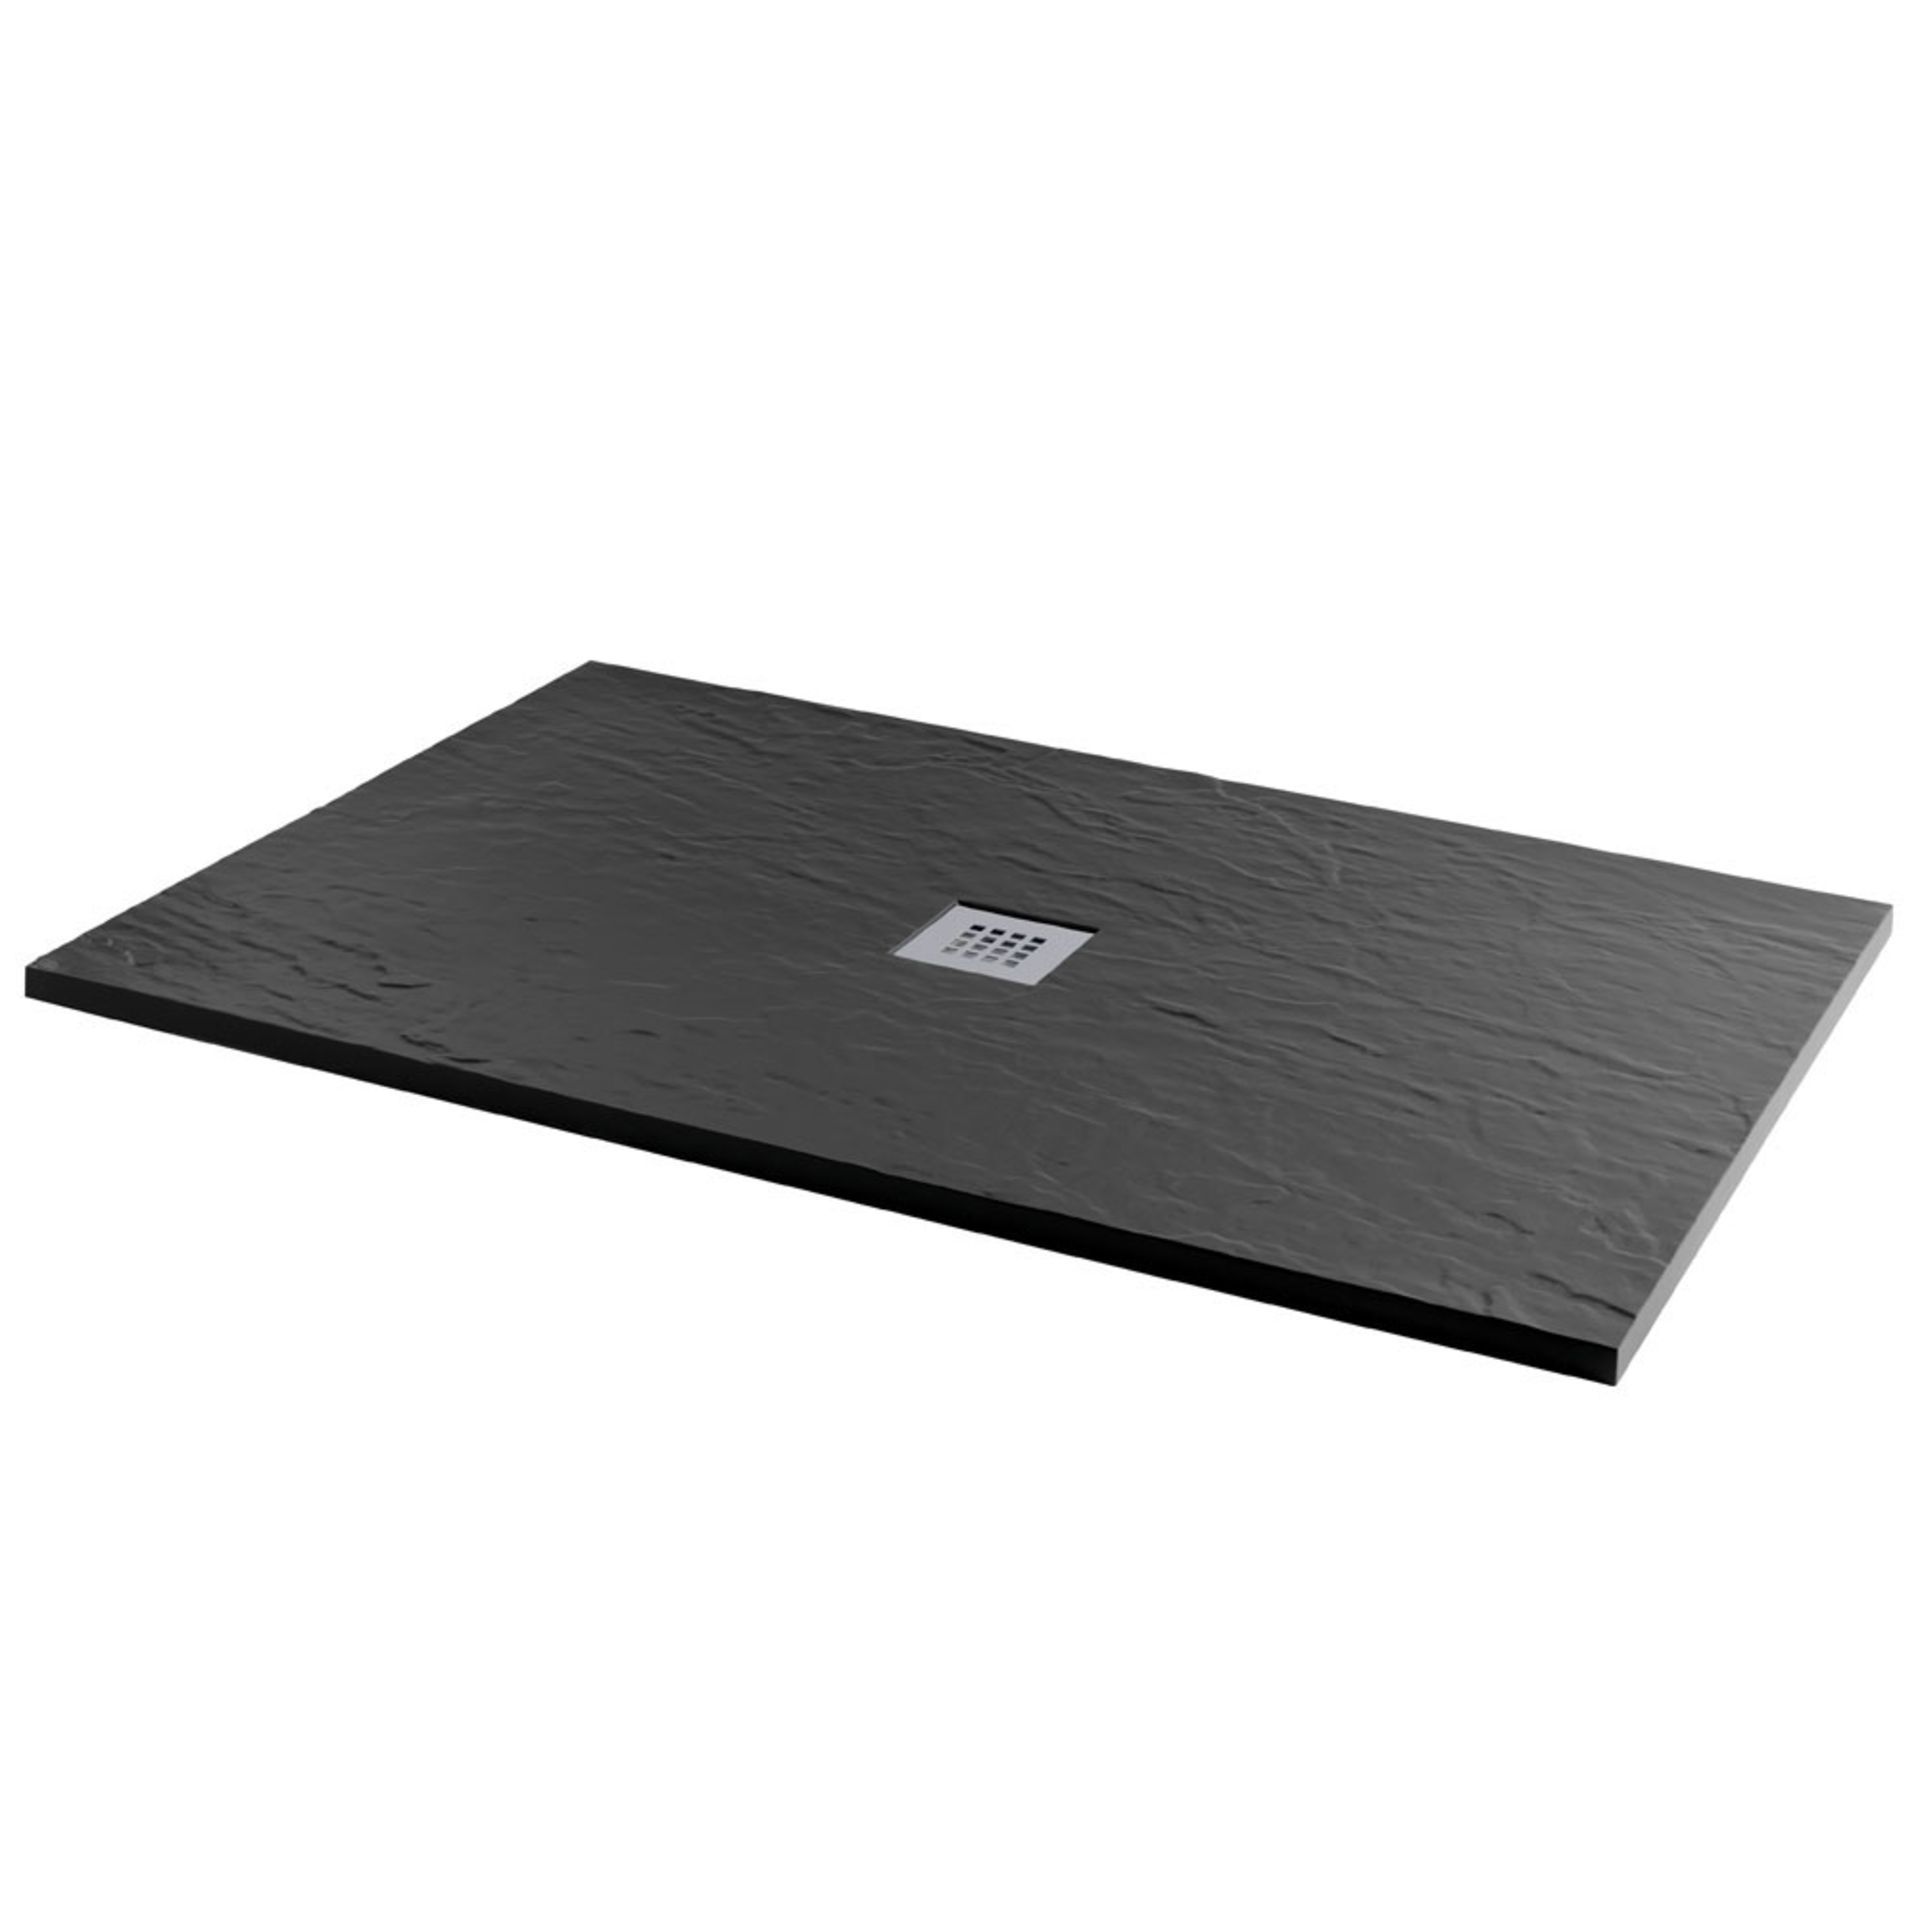 New 1200x800mm Rectangle Black Slate Effect Shower Tray. RRP £549.99.A Textured Black Slate E... - Image 2 of 3